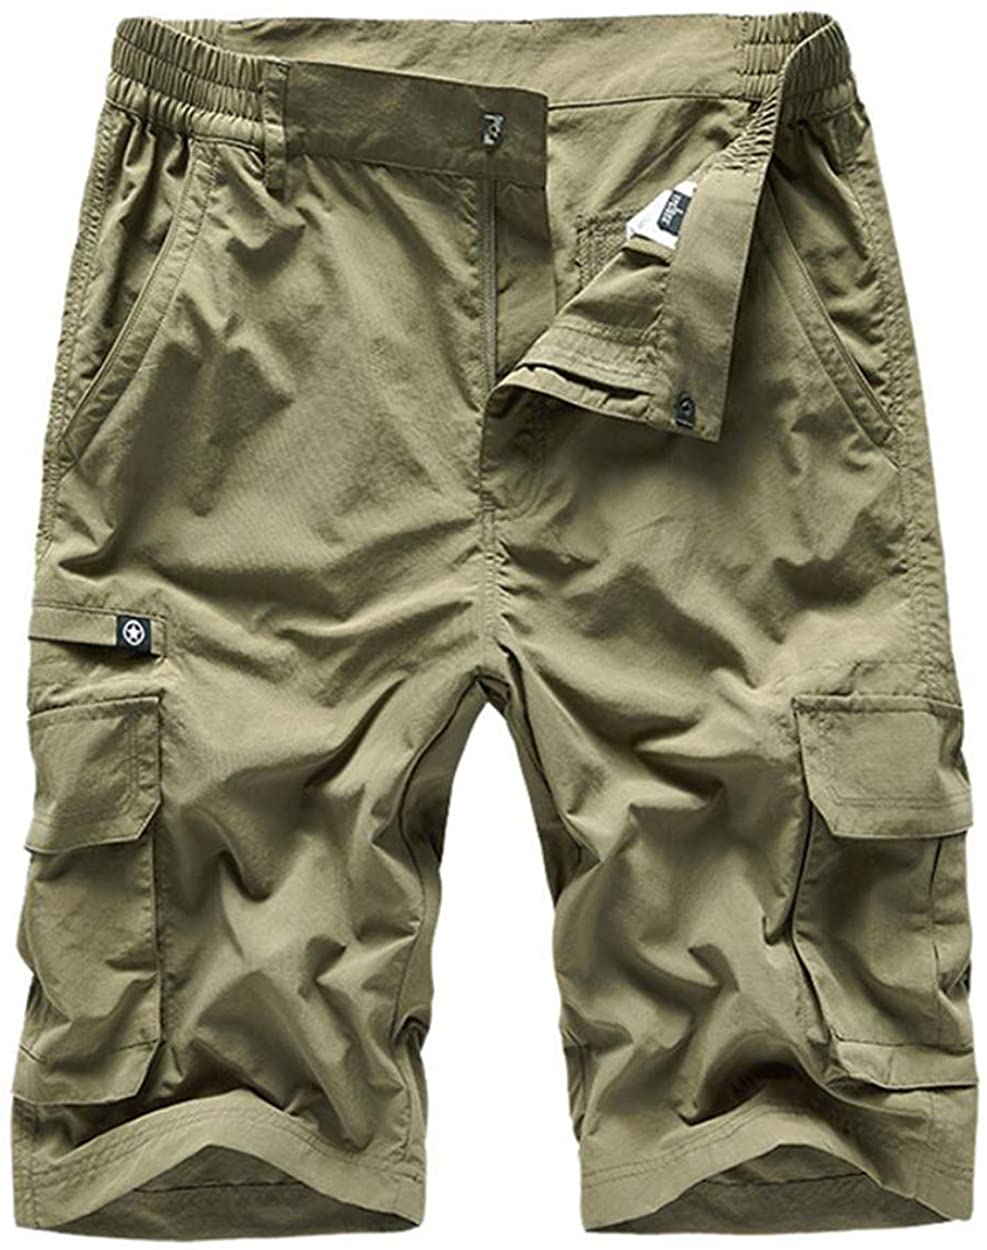 Kolongvangie Mens Outdoor Super Lightweight Quick Dry Hiking Casual Cargo Shorts with Multi Pockets No Belt 